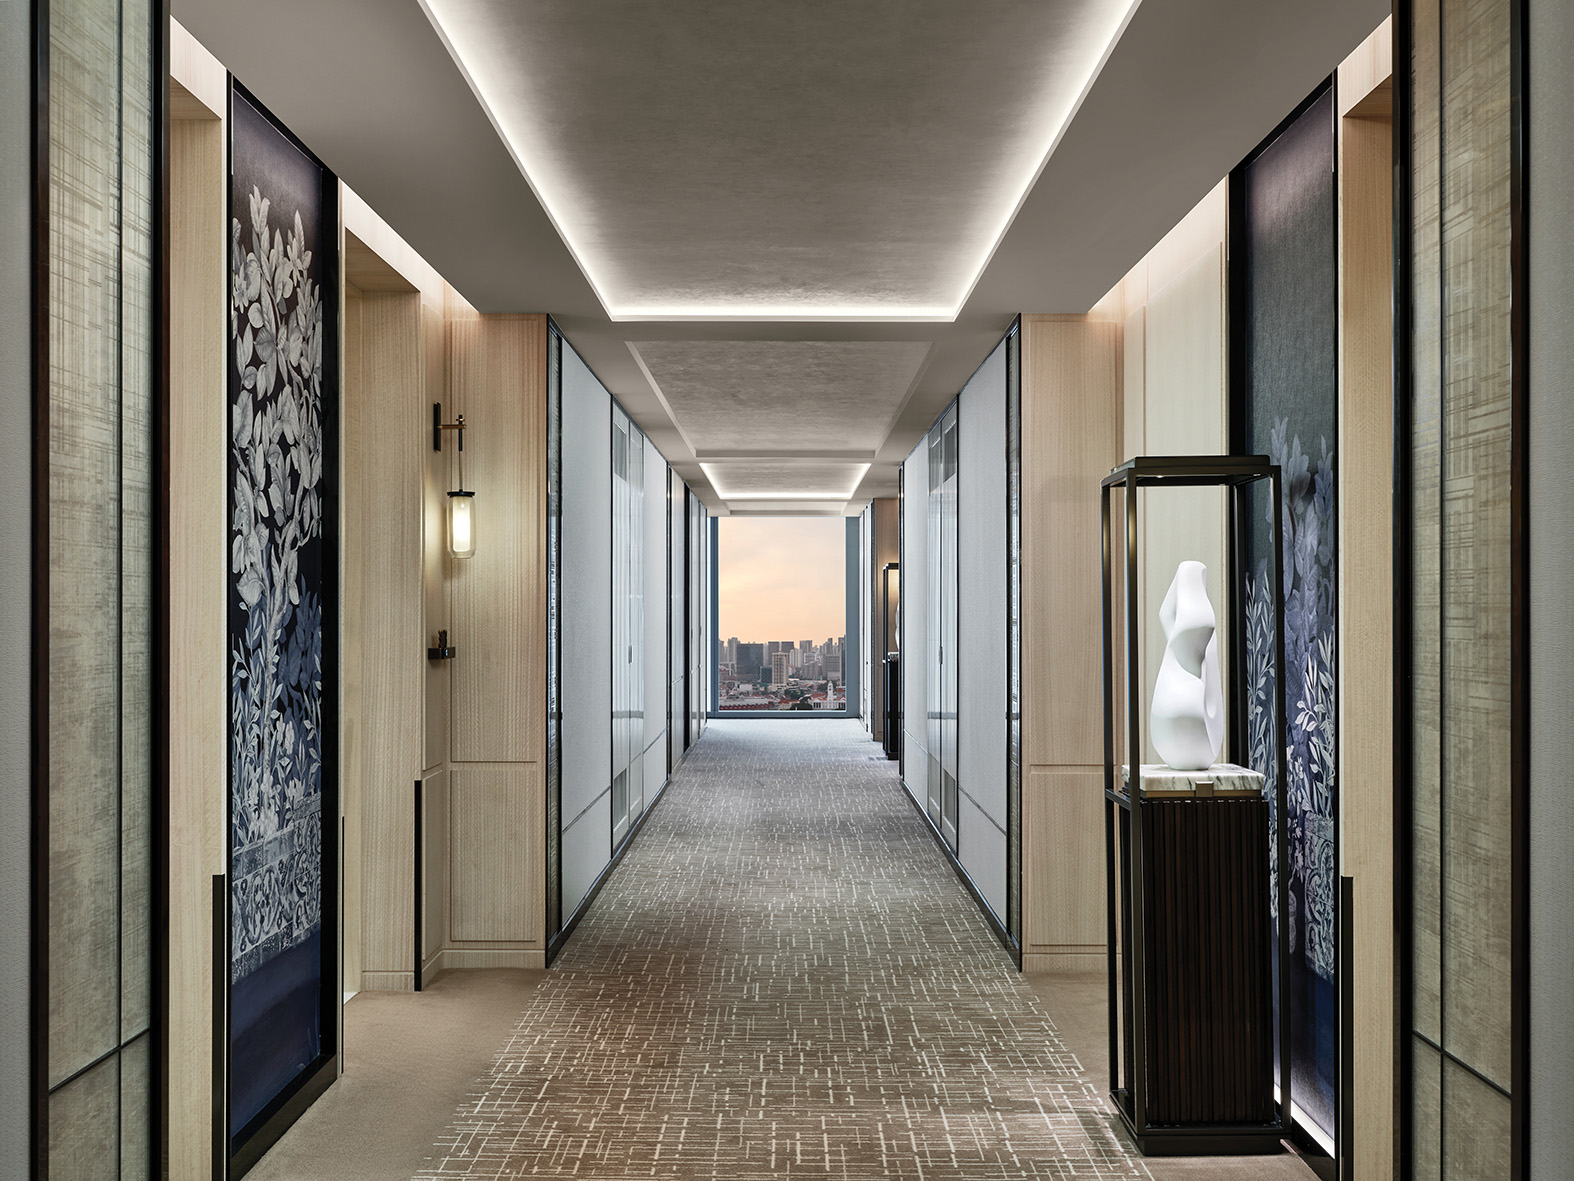 The corridor is embellished with details of the tropical garden city (Credit to Marina Bay Sands)